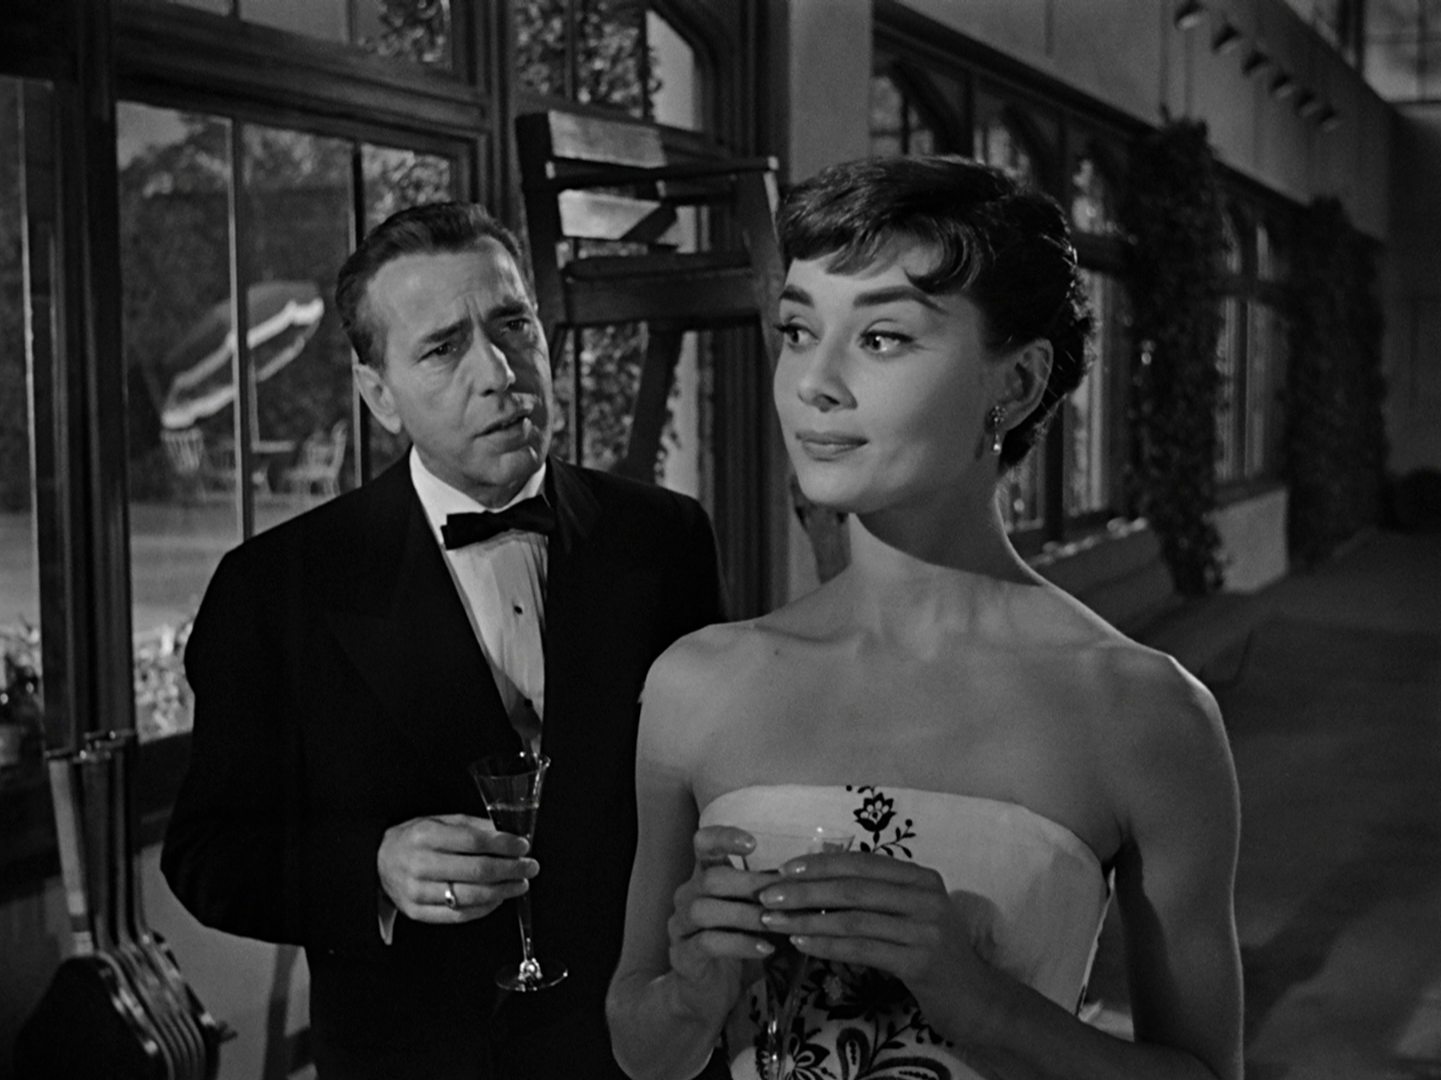 Black and white scene with Humphrey Bogart and Audey Hepburn in a hall; both are wearing evening clothes and are each holding a champagne glass in their hand.